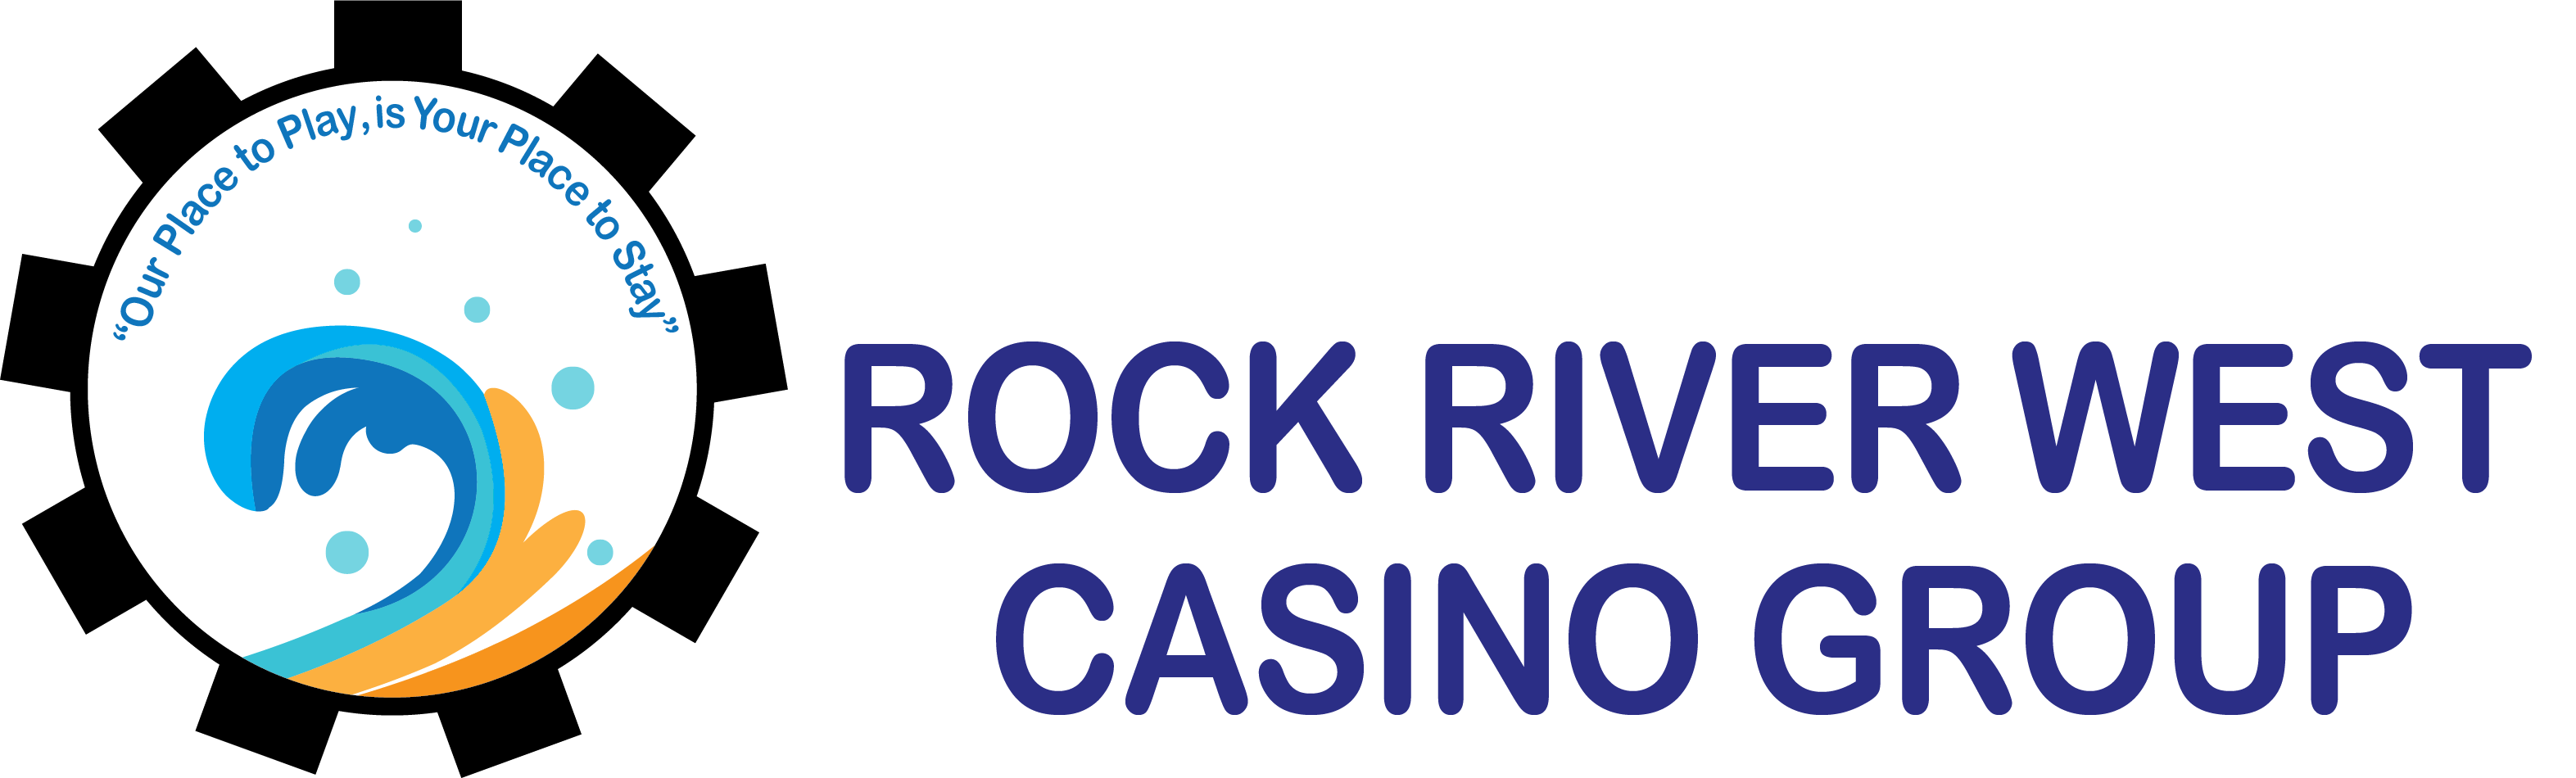 Rock River West Casino Group